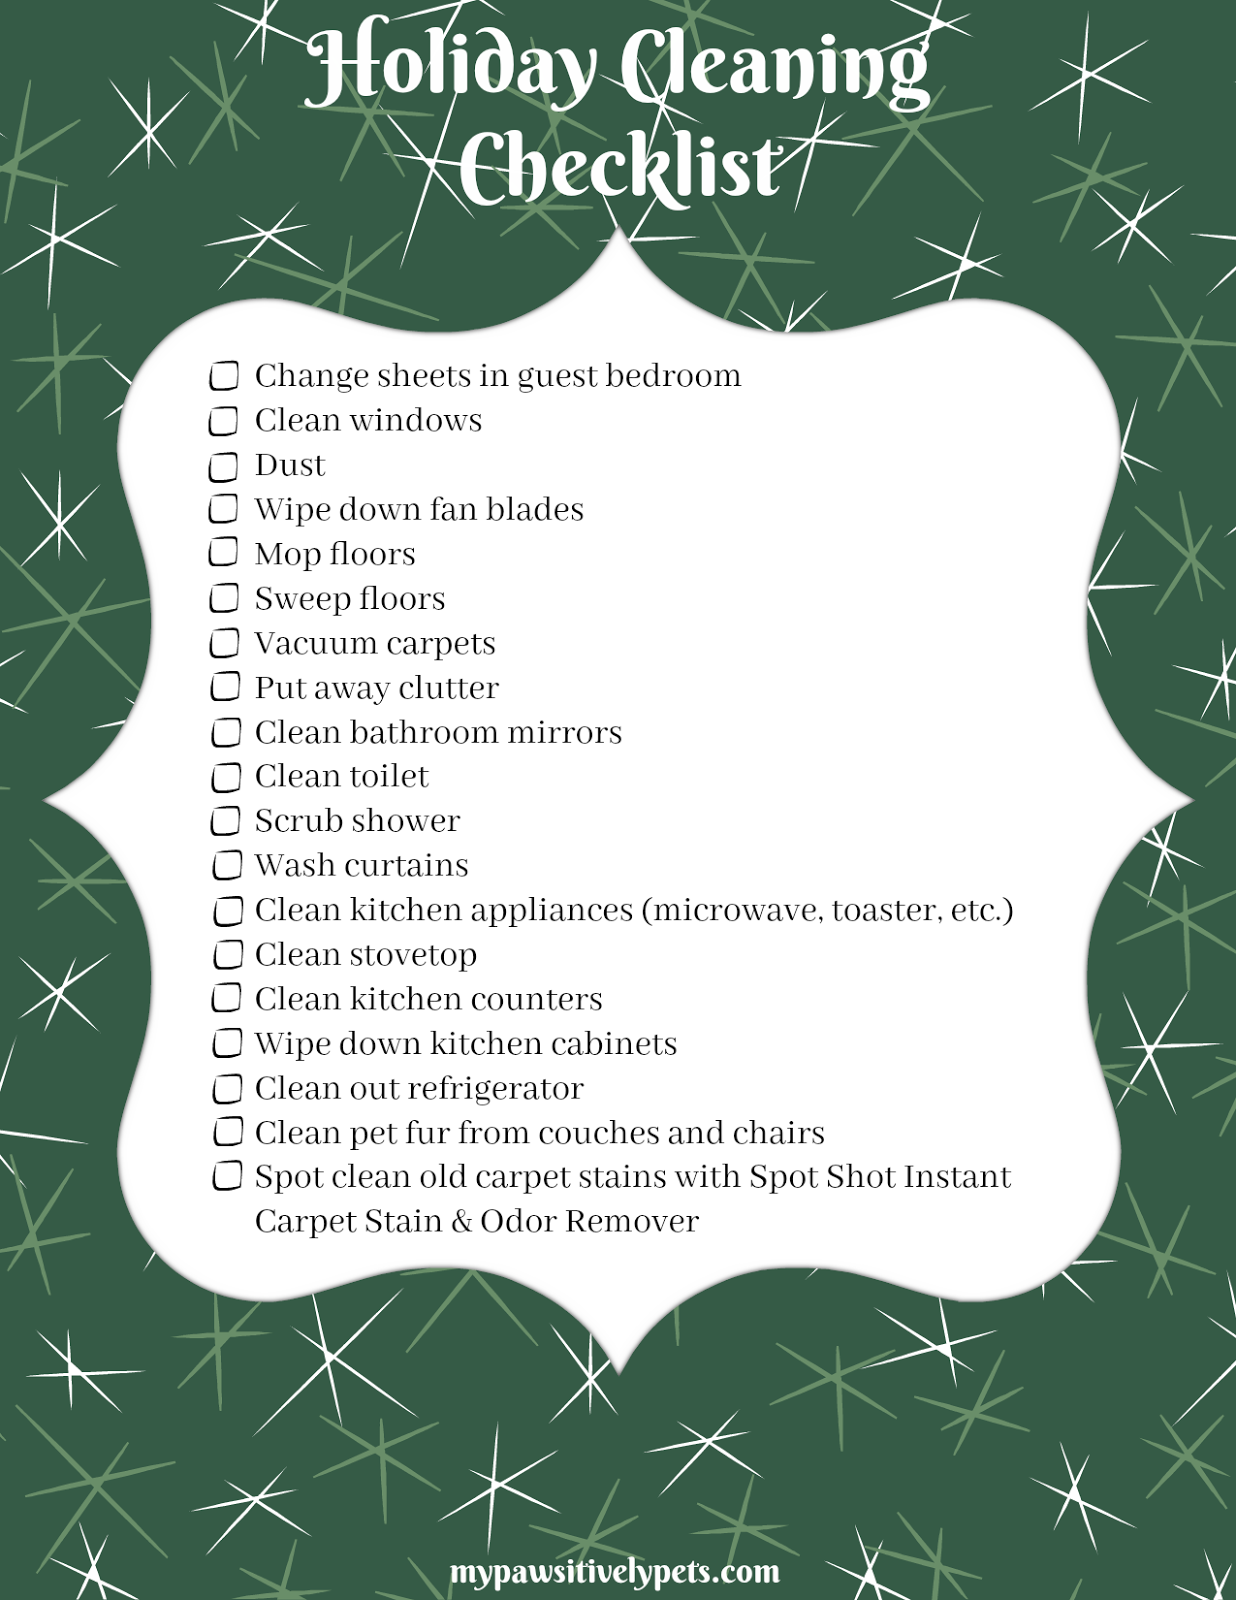 get-your-home-ready-for-the-holidays-printable-cleaning-checklist-pawsitively-pets